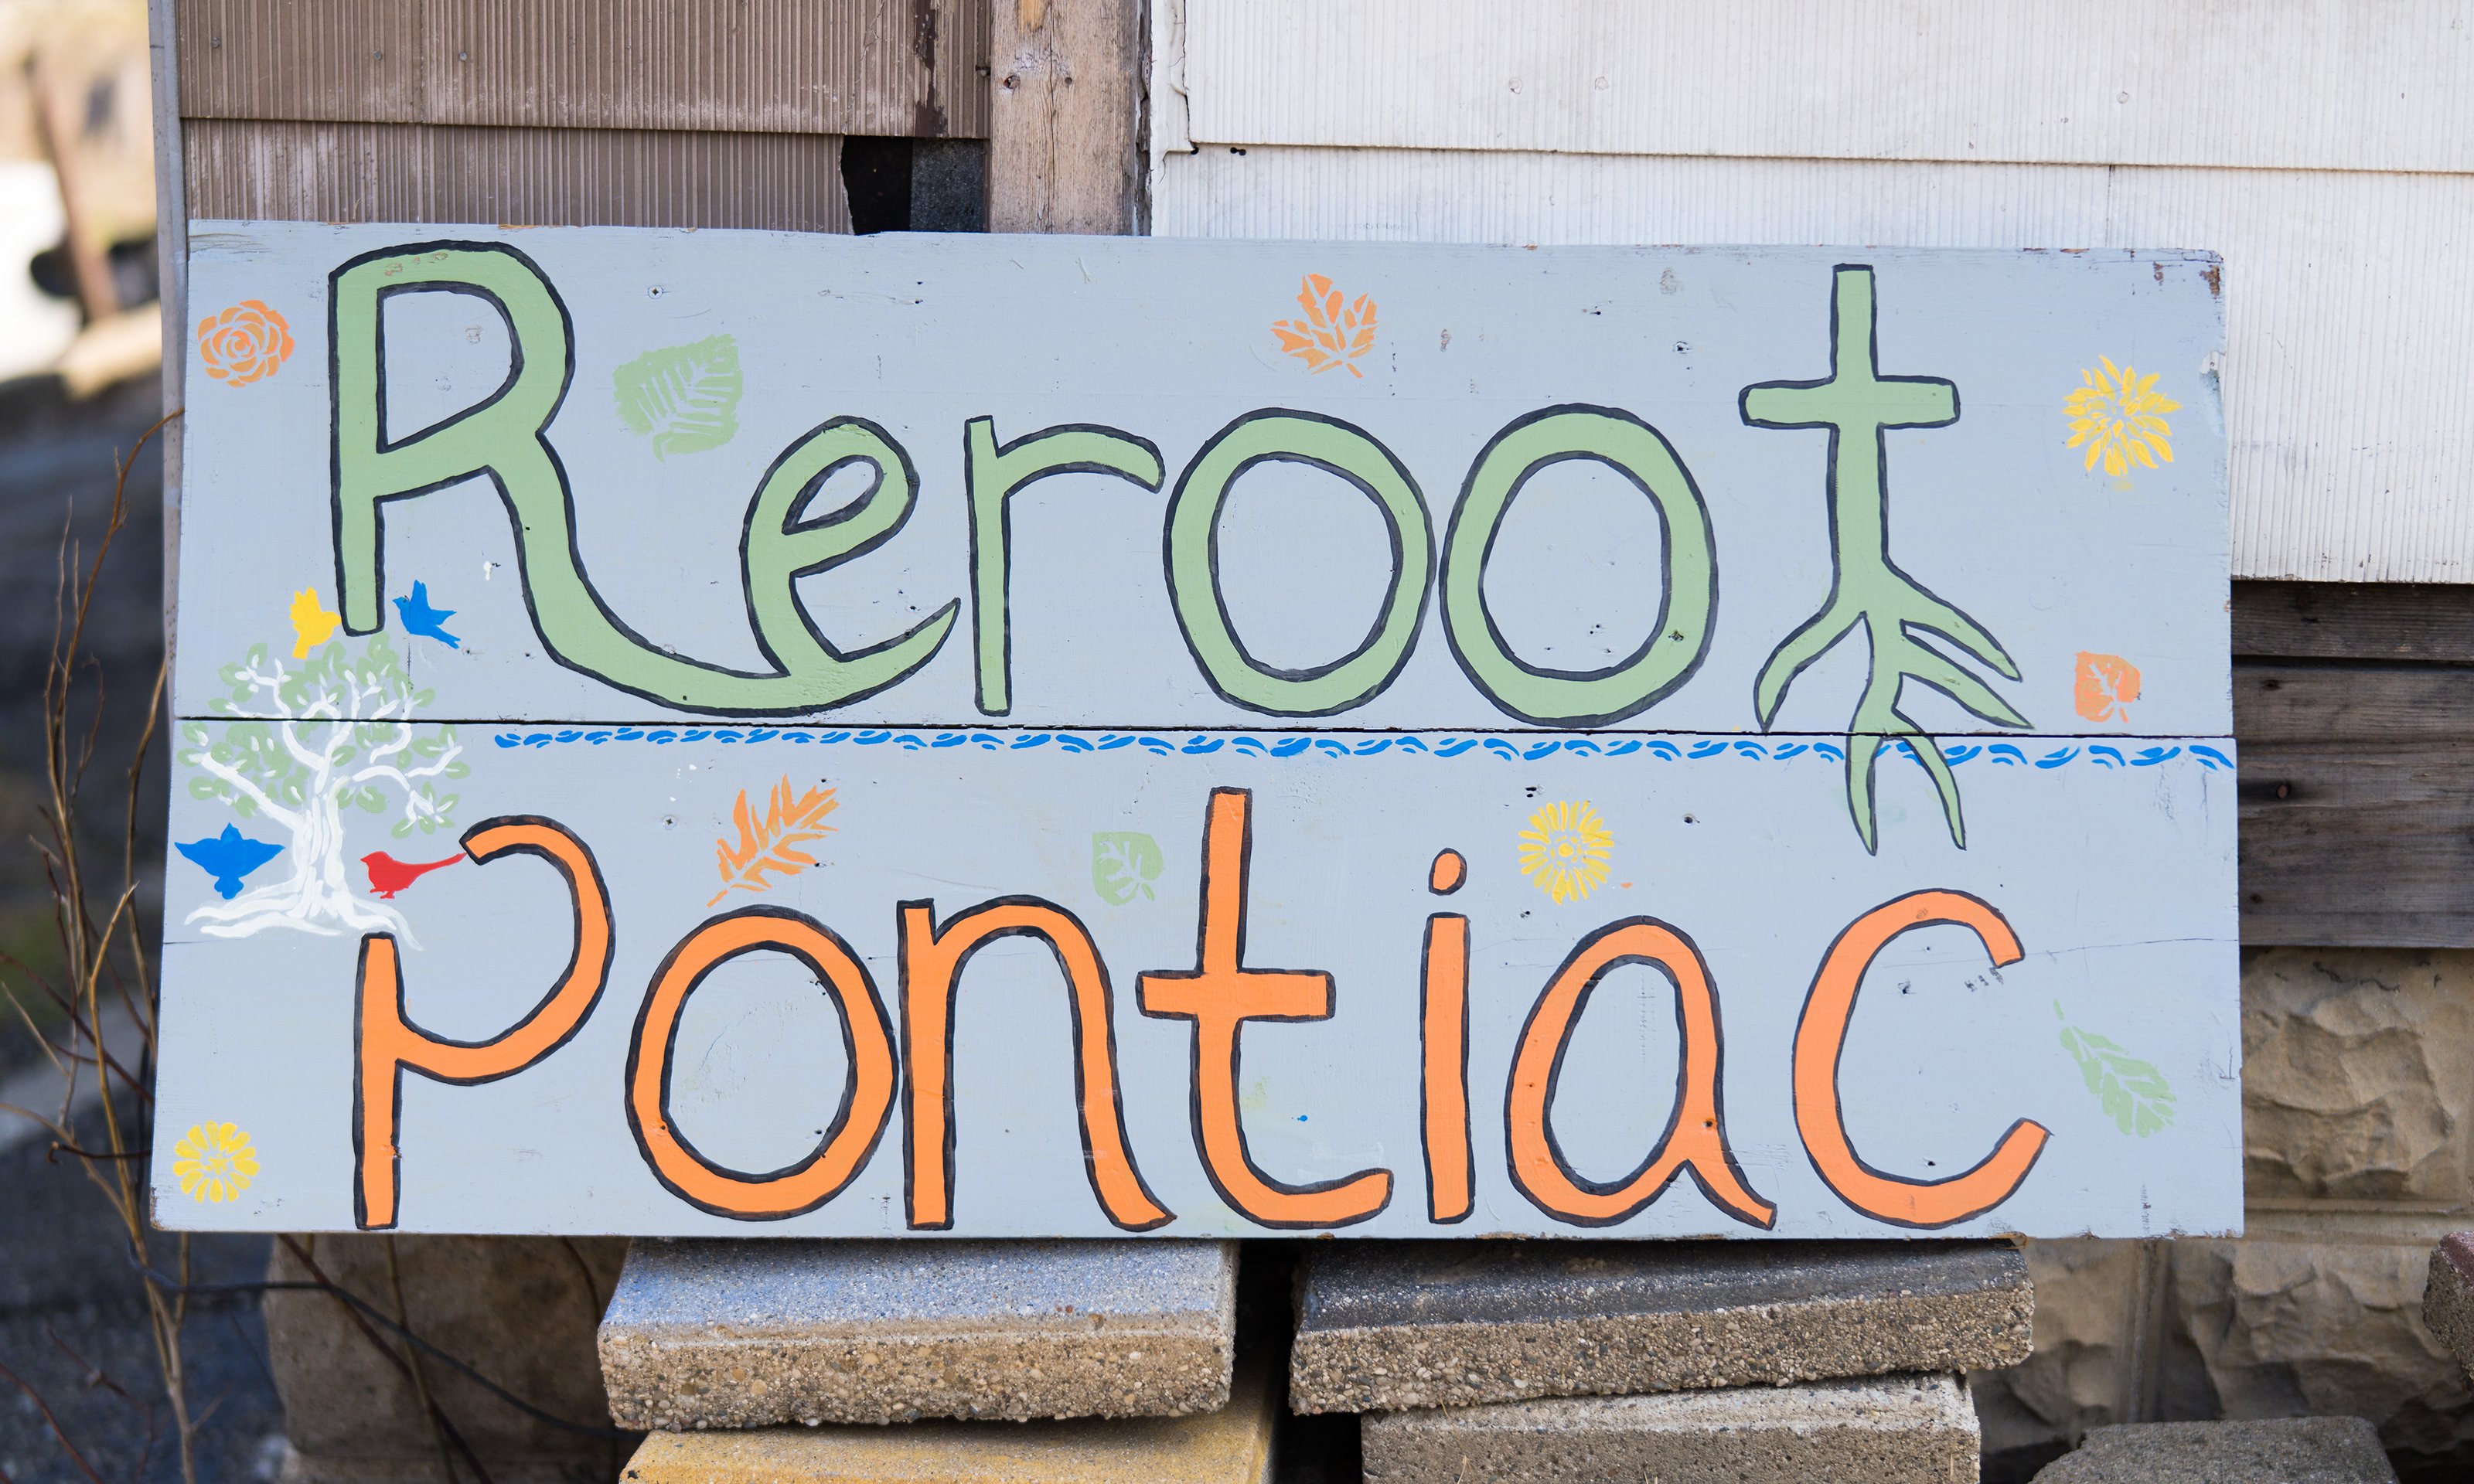 A sign that reads "Reroot Pontiac"